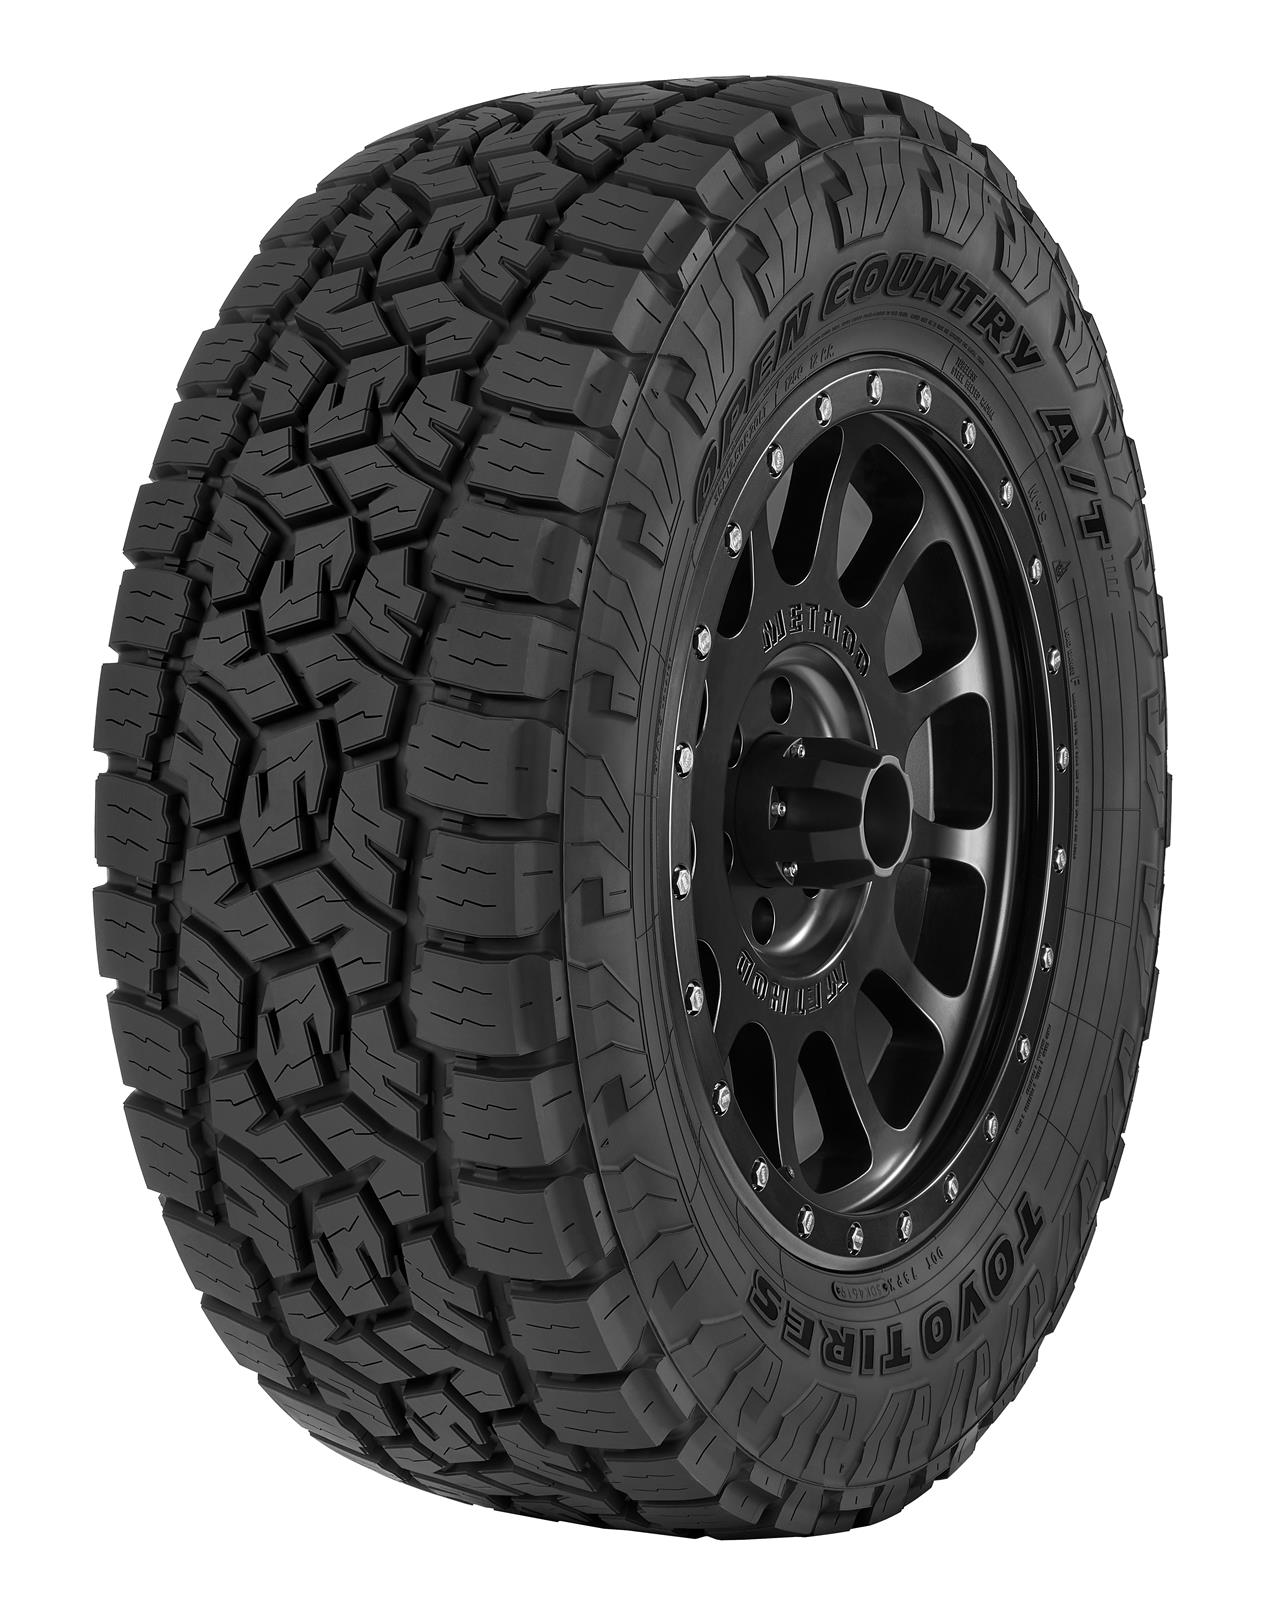 Toyo Tires 355740 Toyo Open Country A/T III Tires | Summit Racing